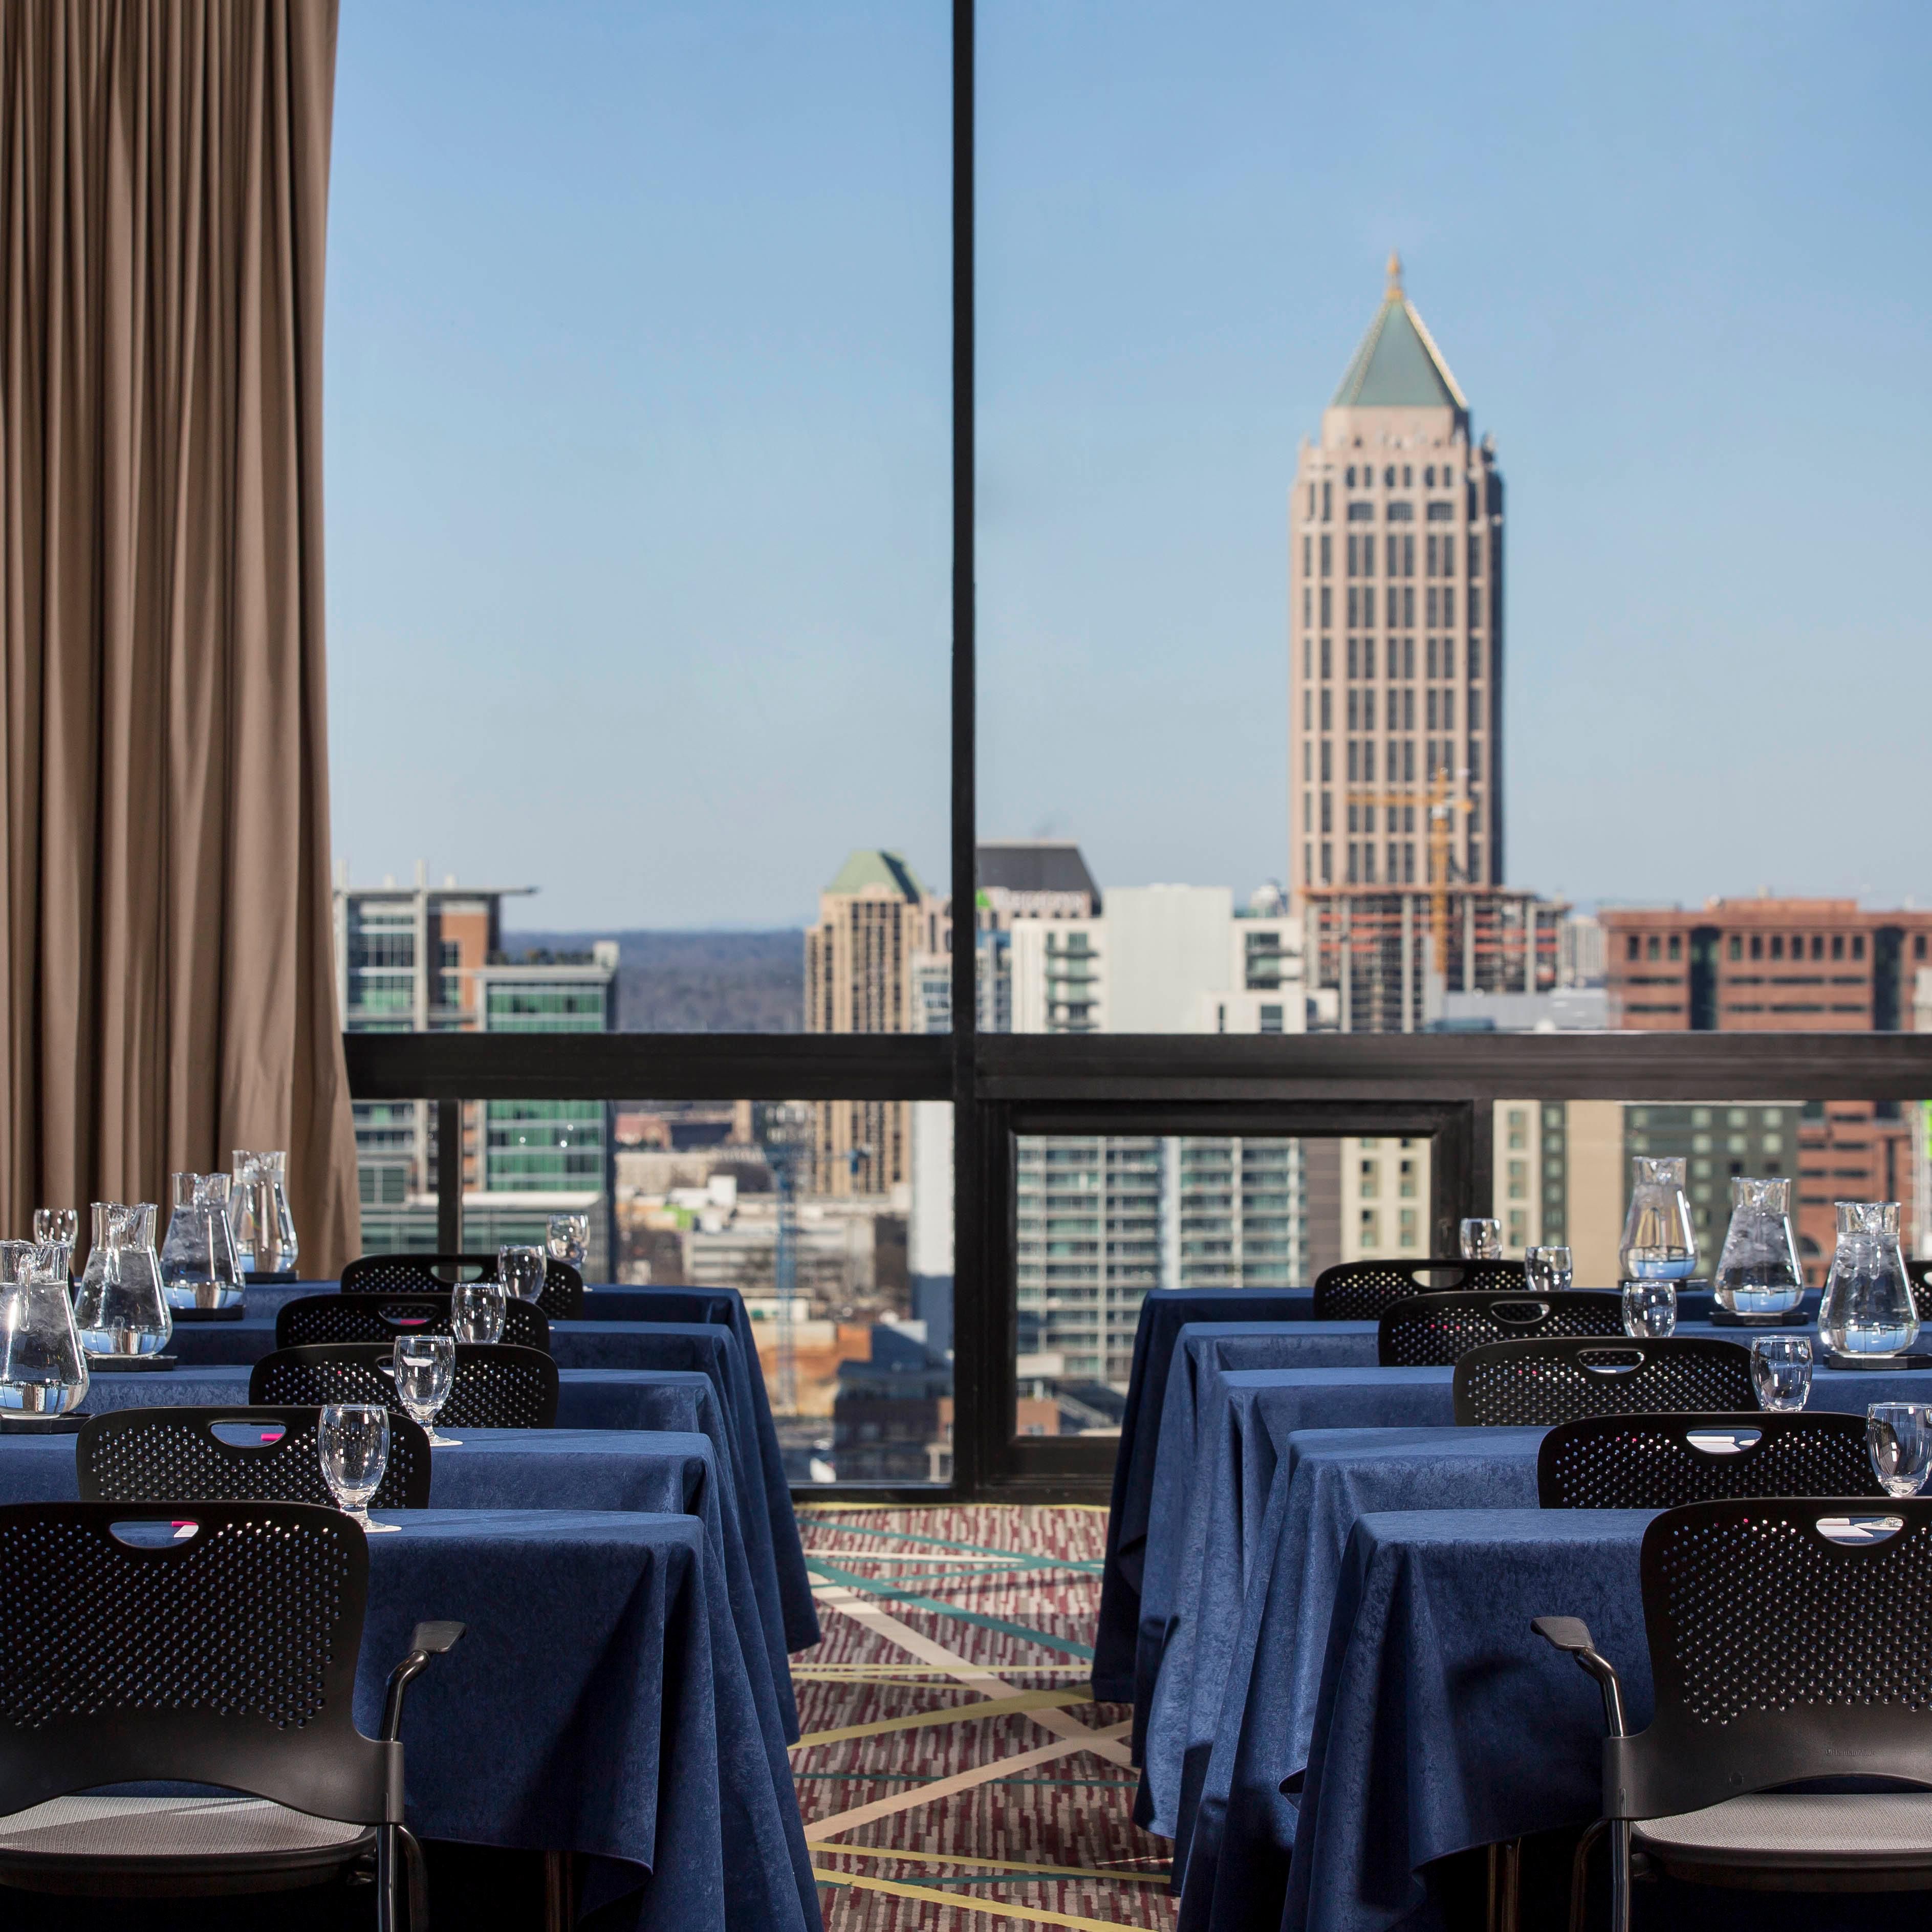 Unparalleled views when you have a meeting in the SKY Room.